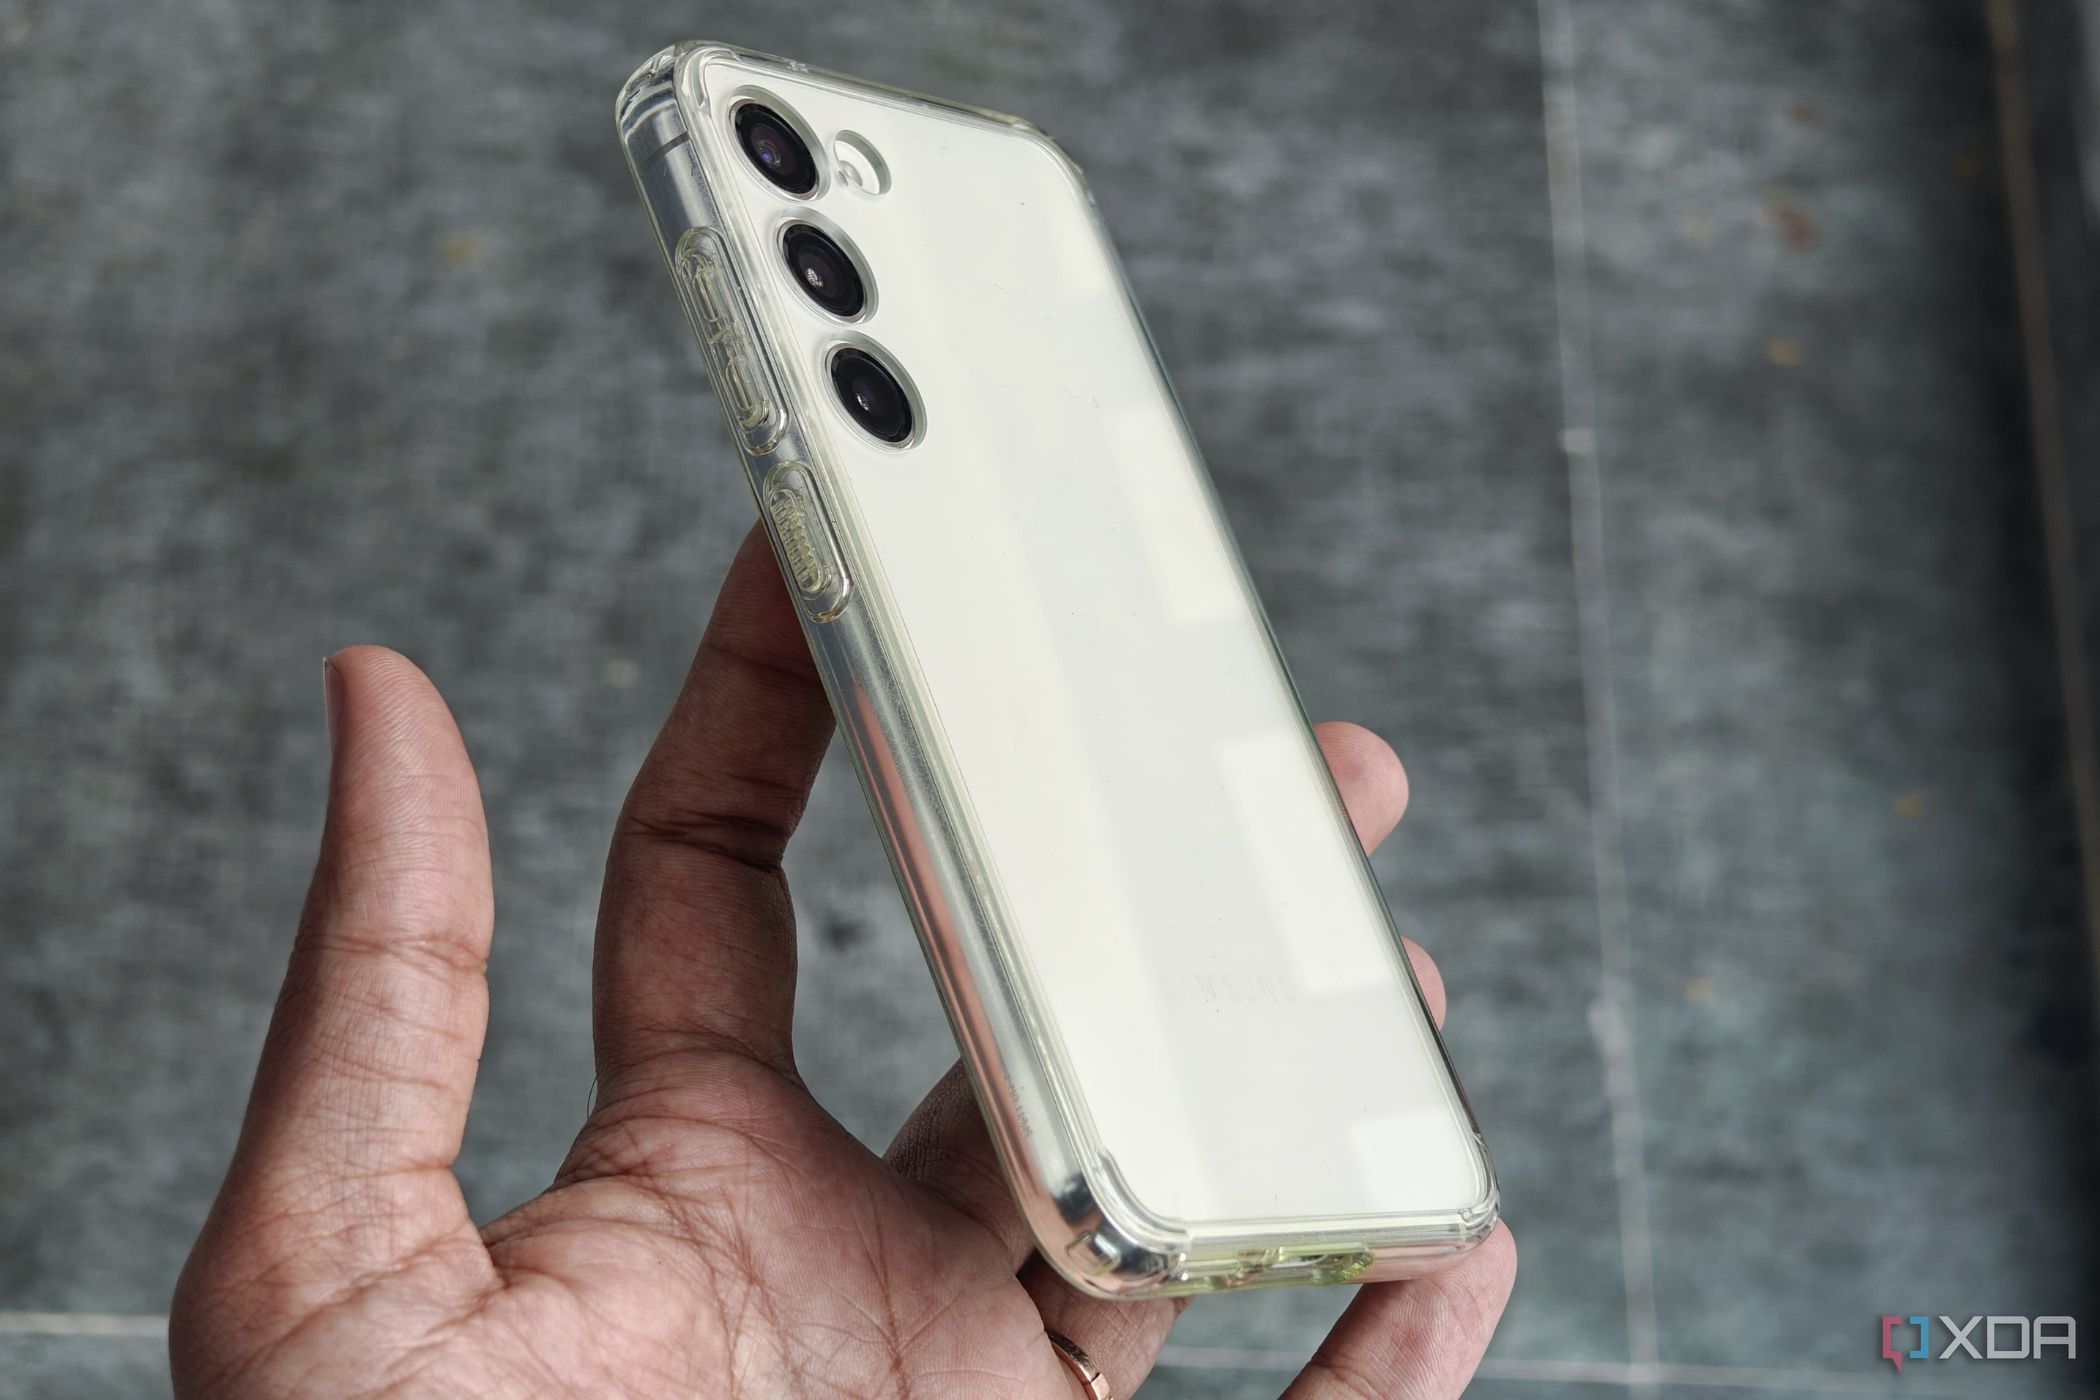 An image showing a clear case that has started yellowing from the sides.